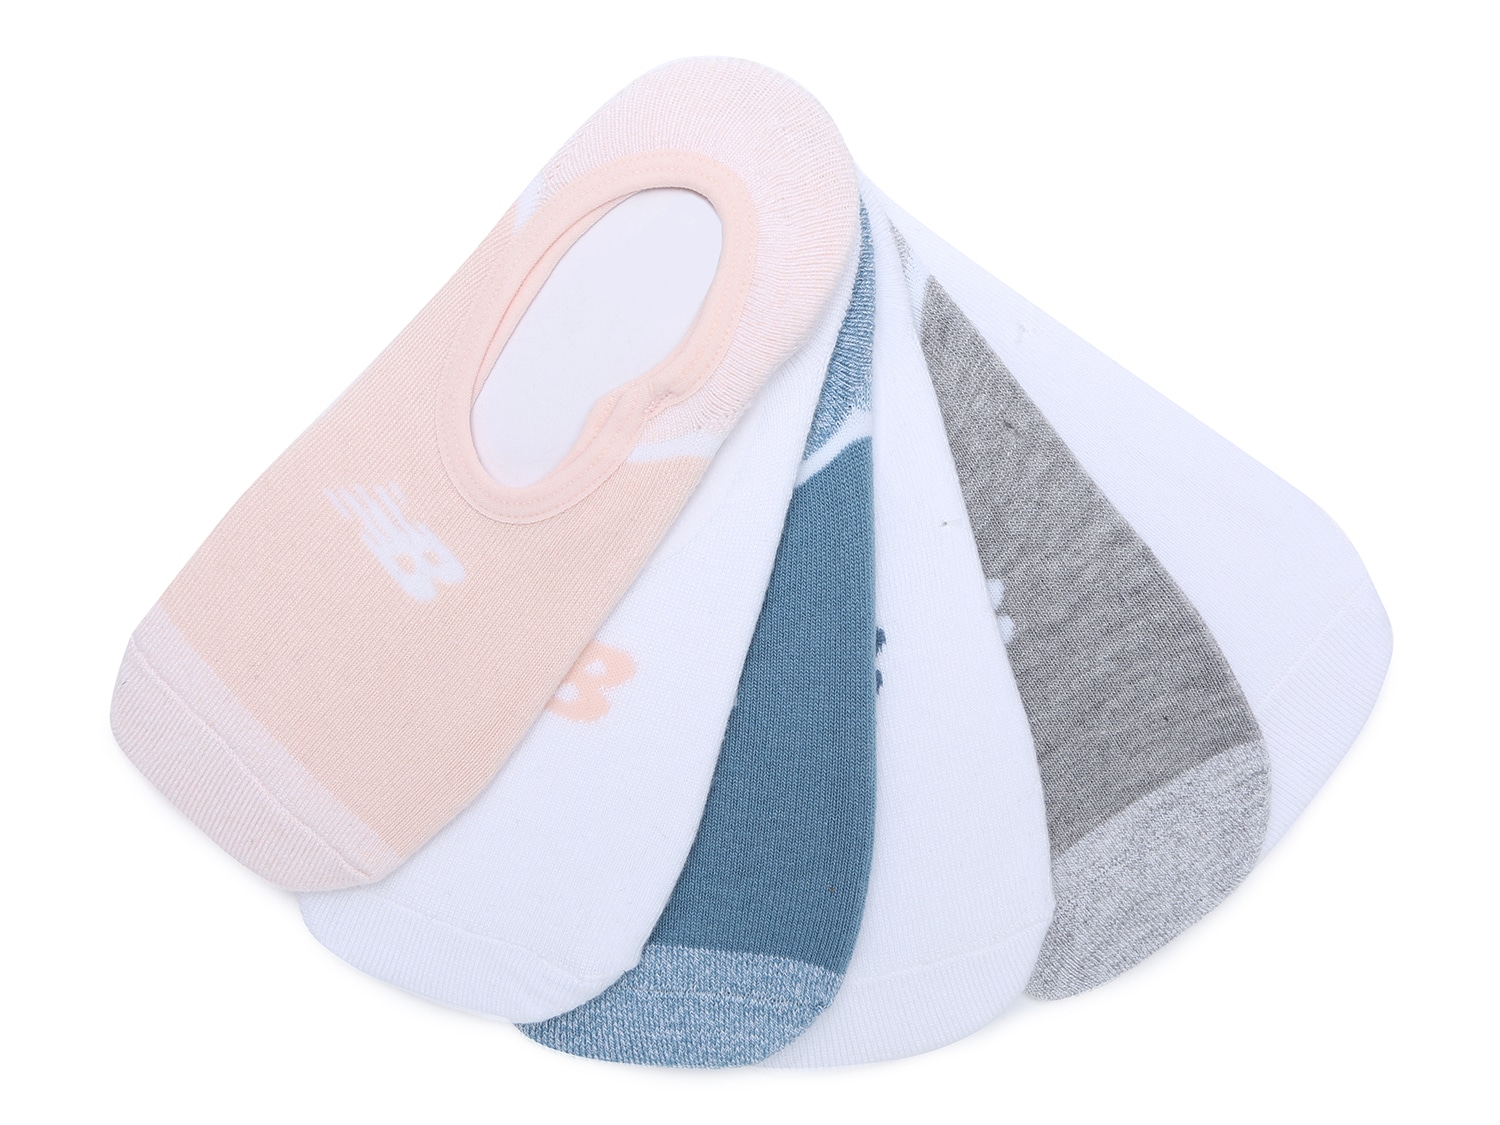 New Balance Color Block Women's No Show Liners - 6 Pack - Free